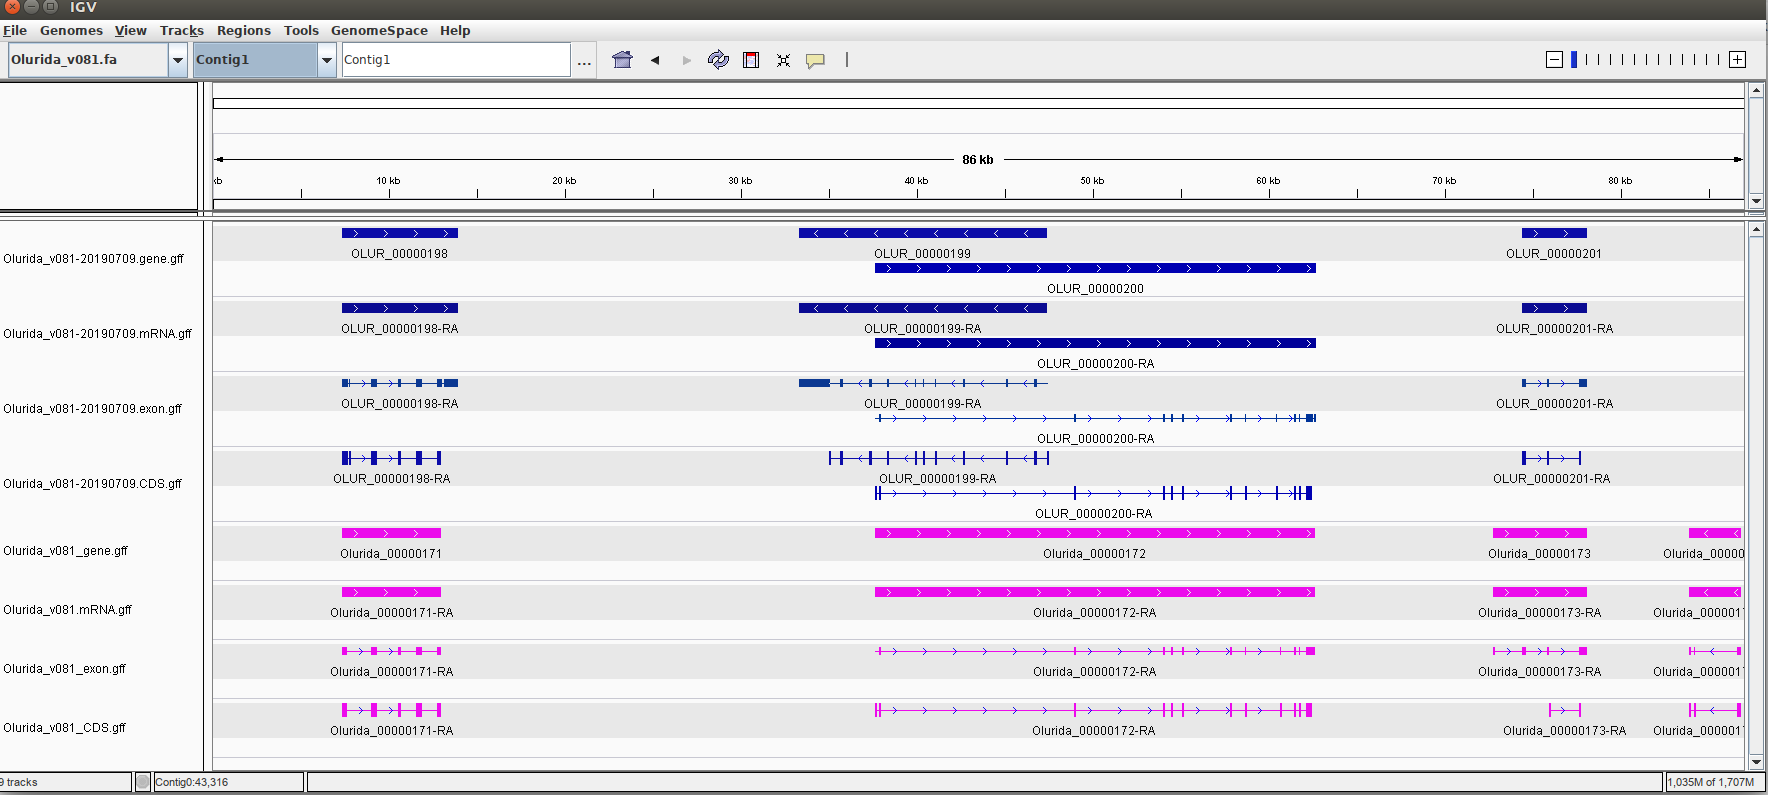 IGV screencap showing additional annotations in current v081